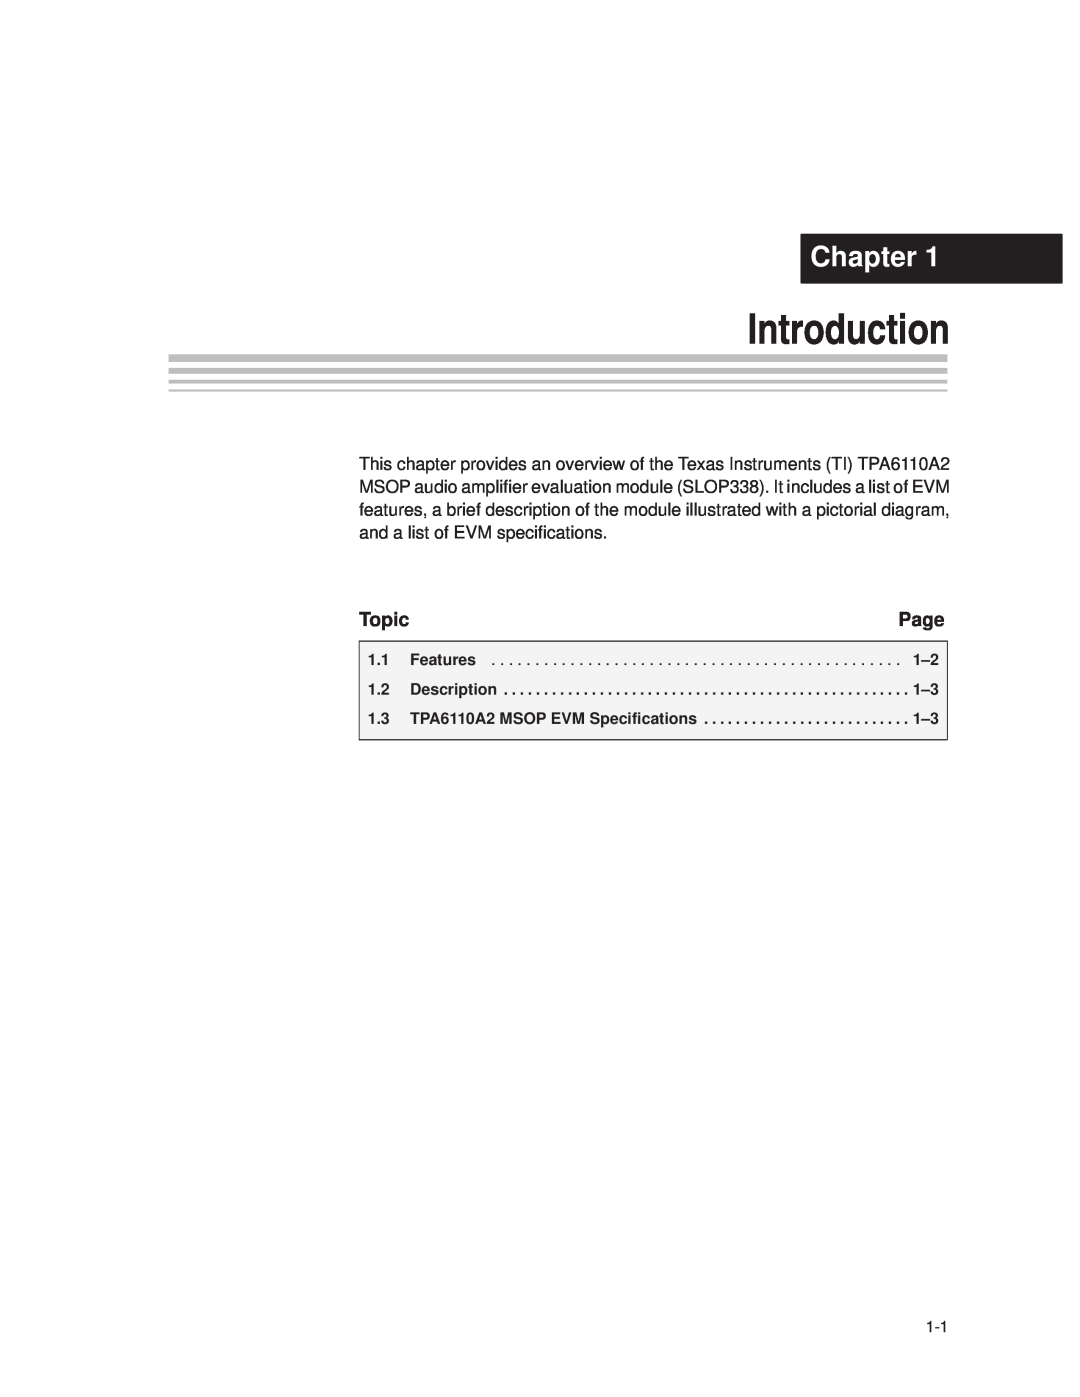 Texas Instruments TPA6110A2 MSOP manual Introduction, Chapter, Page, Topic 